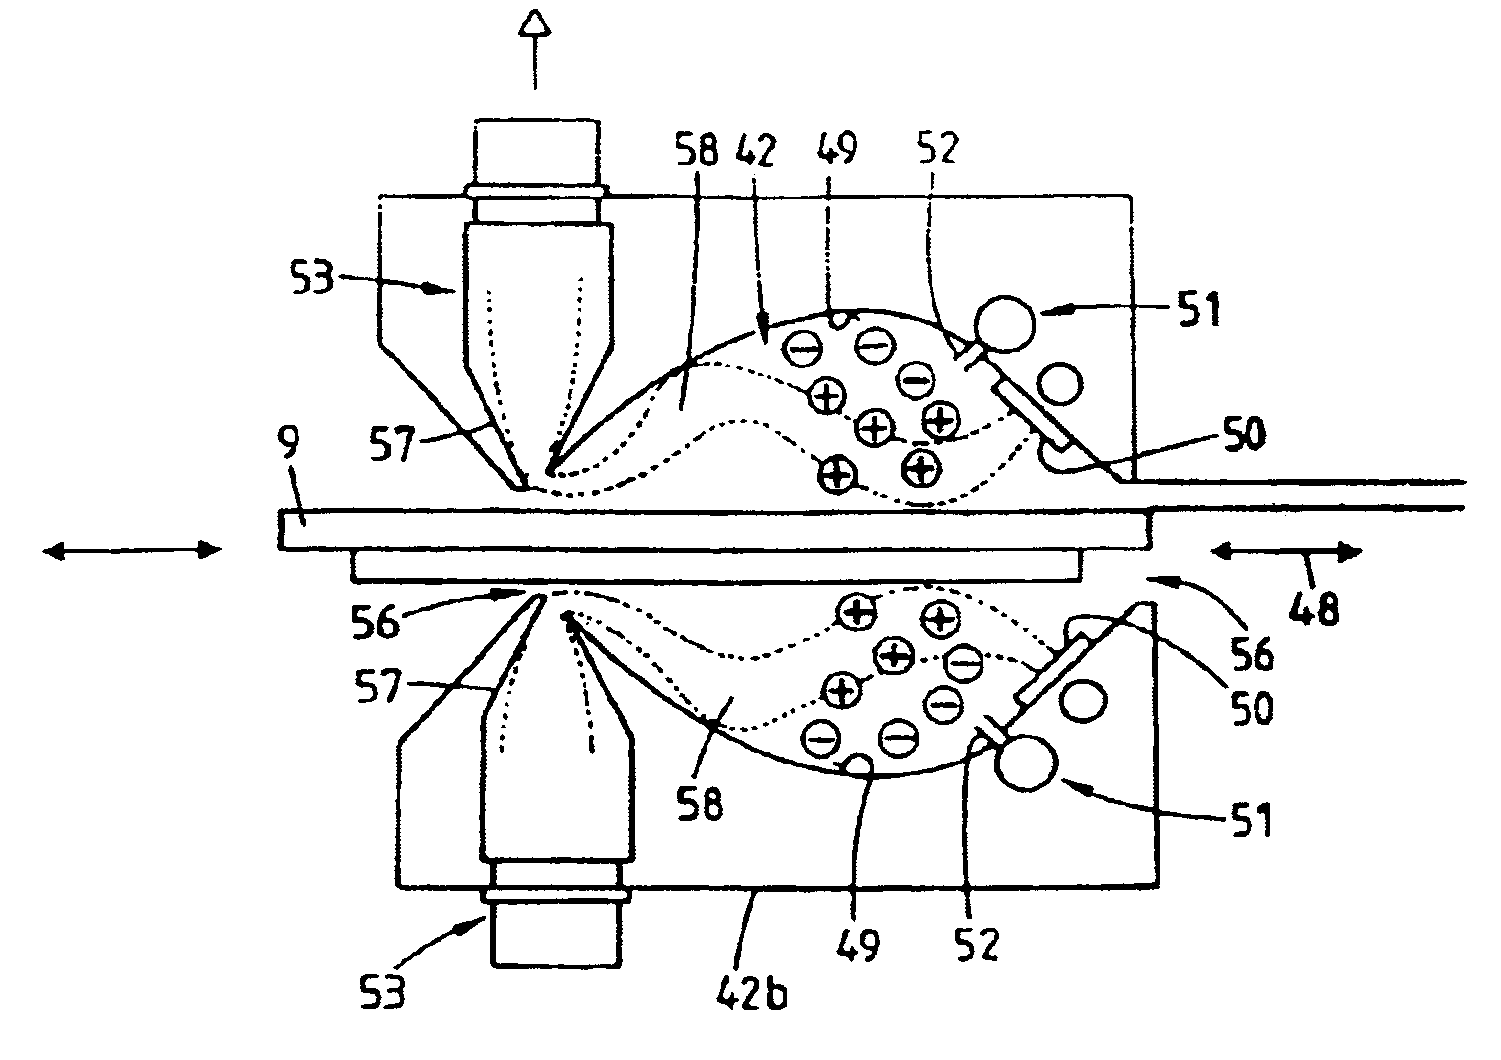 Device and method for cleaning articles used in the production of semiconductor components